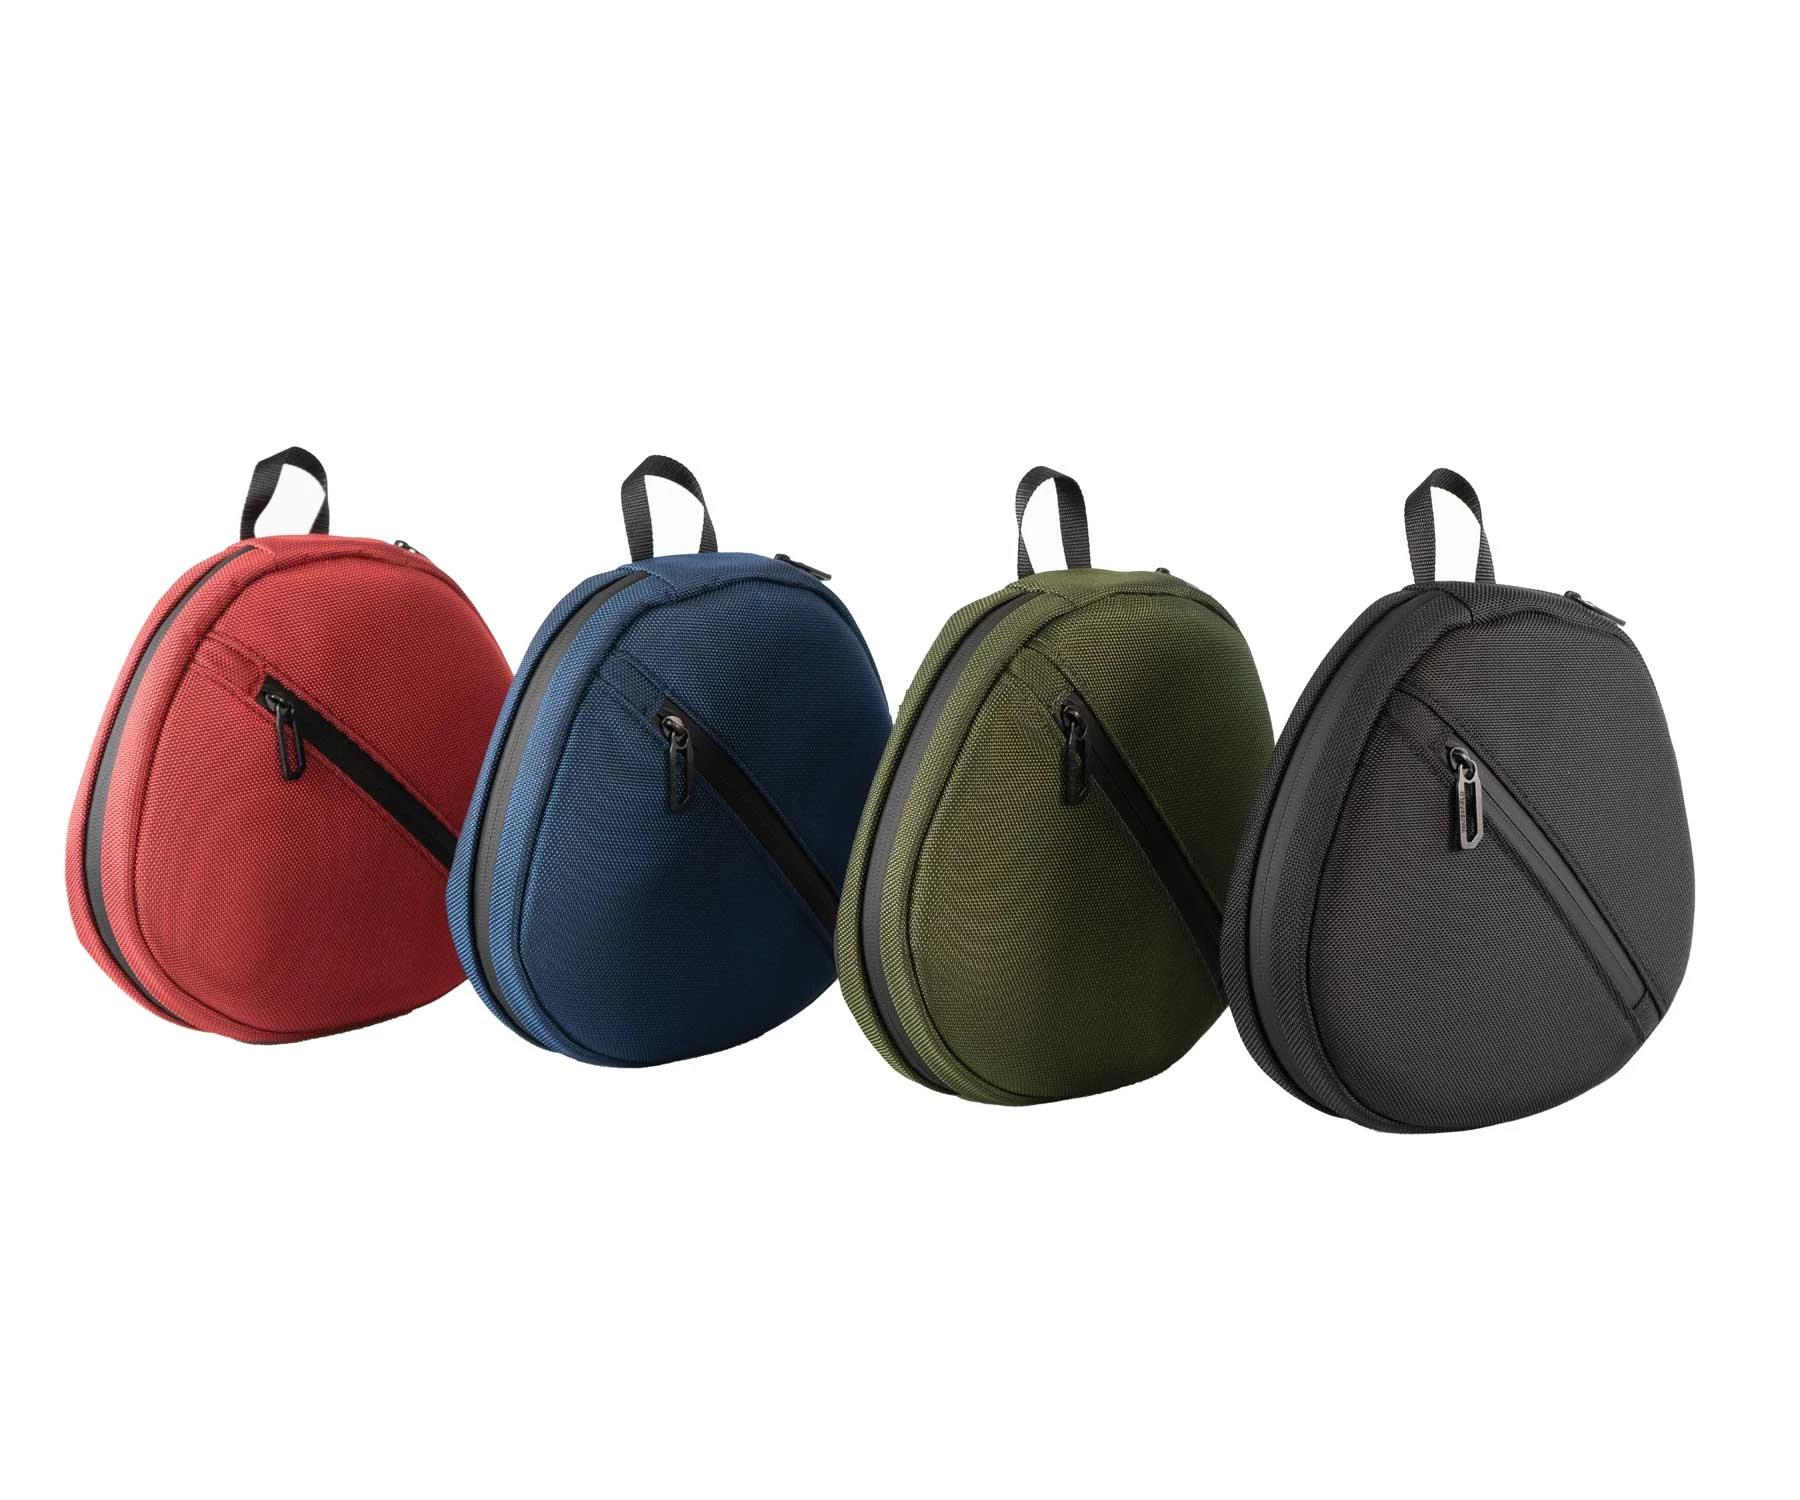 Waterfield Designs Forza Airpods Max Cases